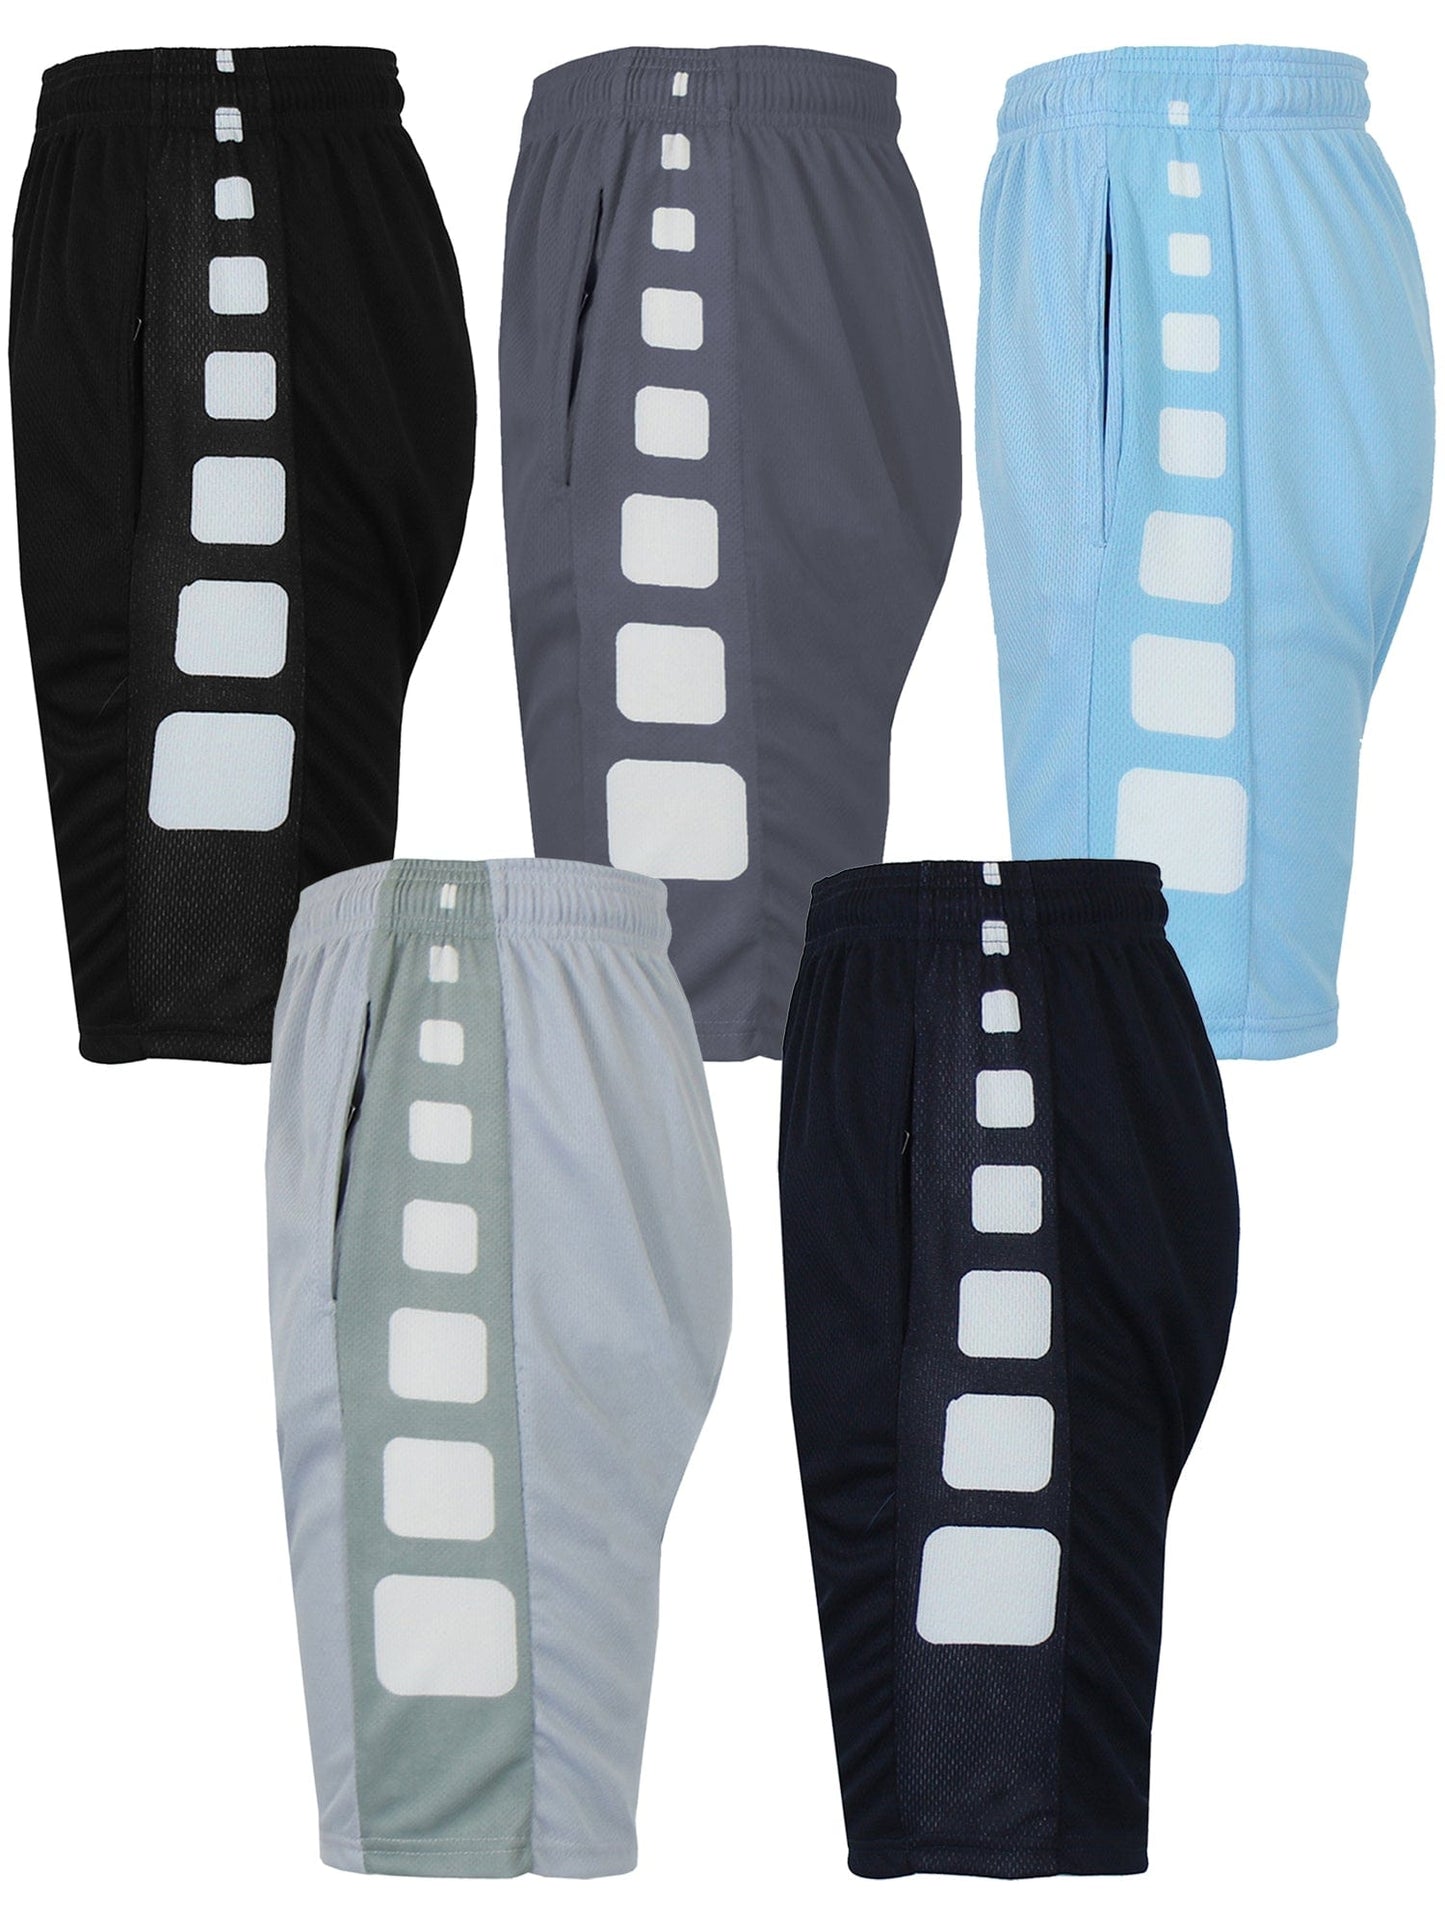 [5 PACK] Men's Active Mesh Moisture Wicking Shorts with Side Design - GalaxybyHarvic